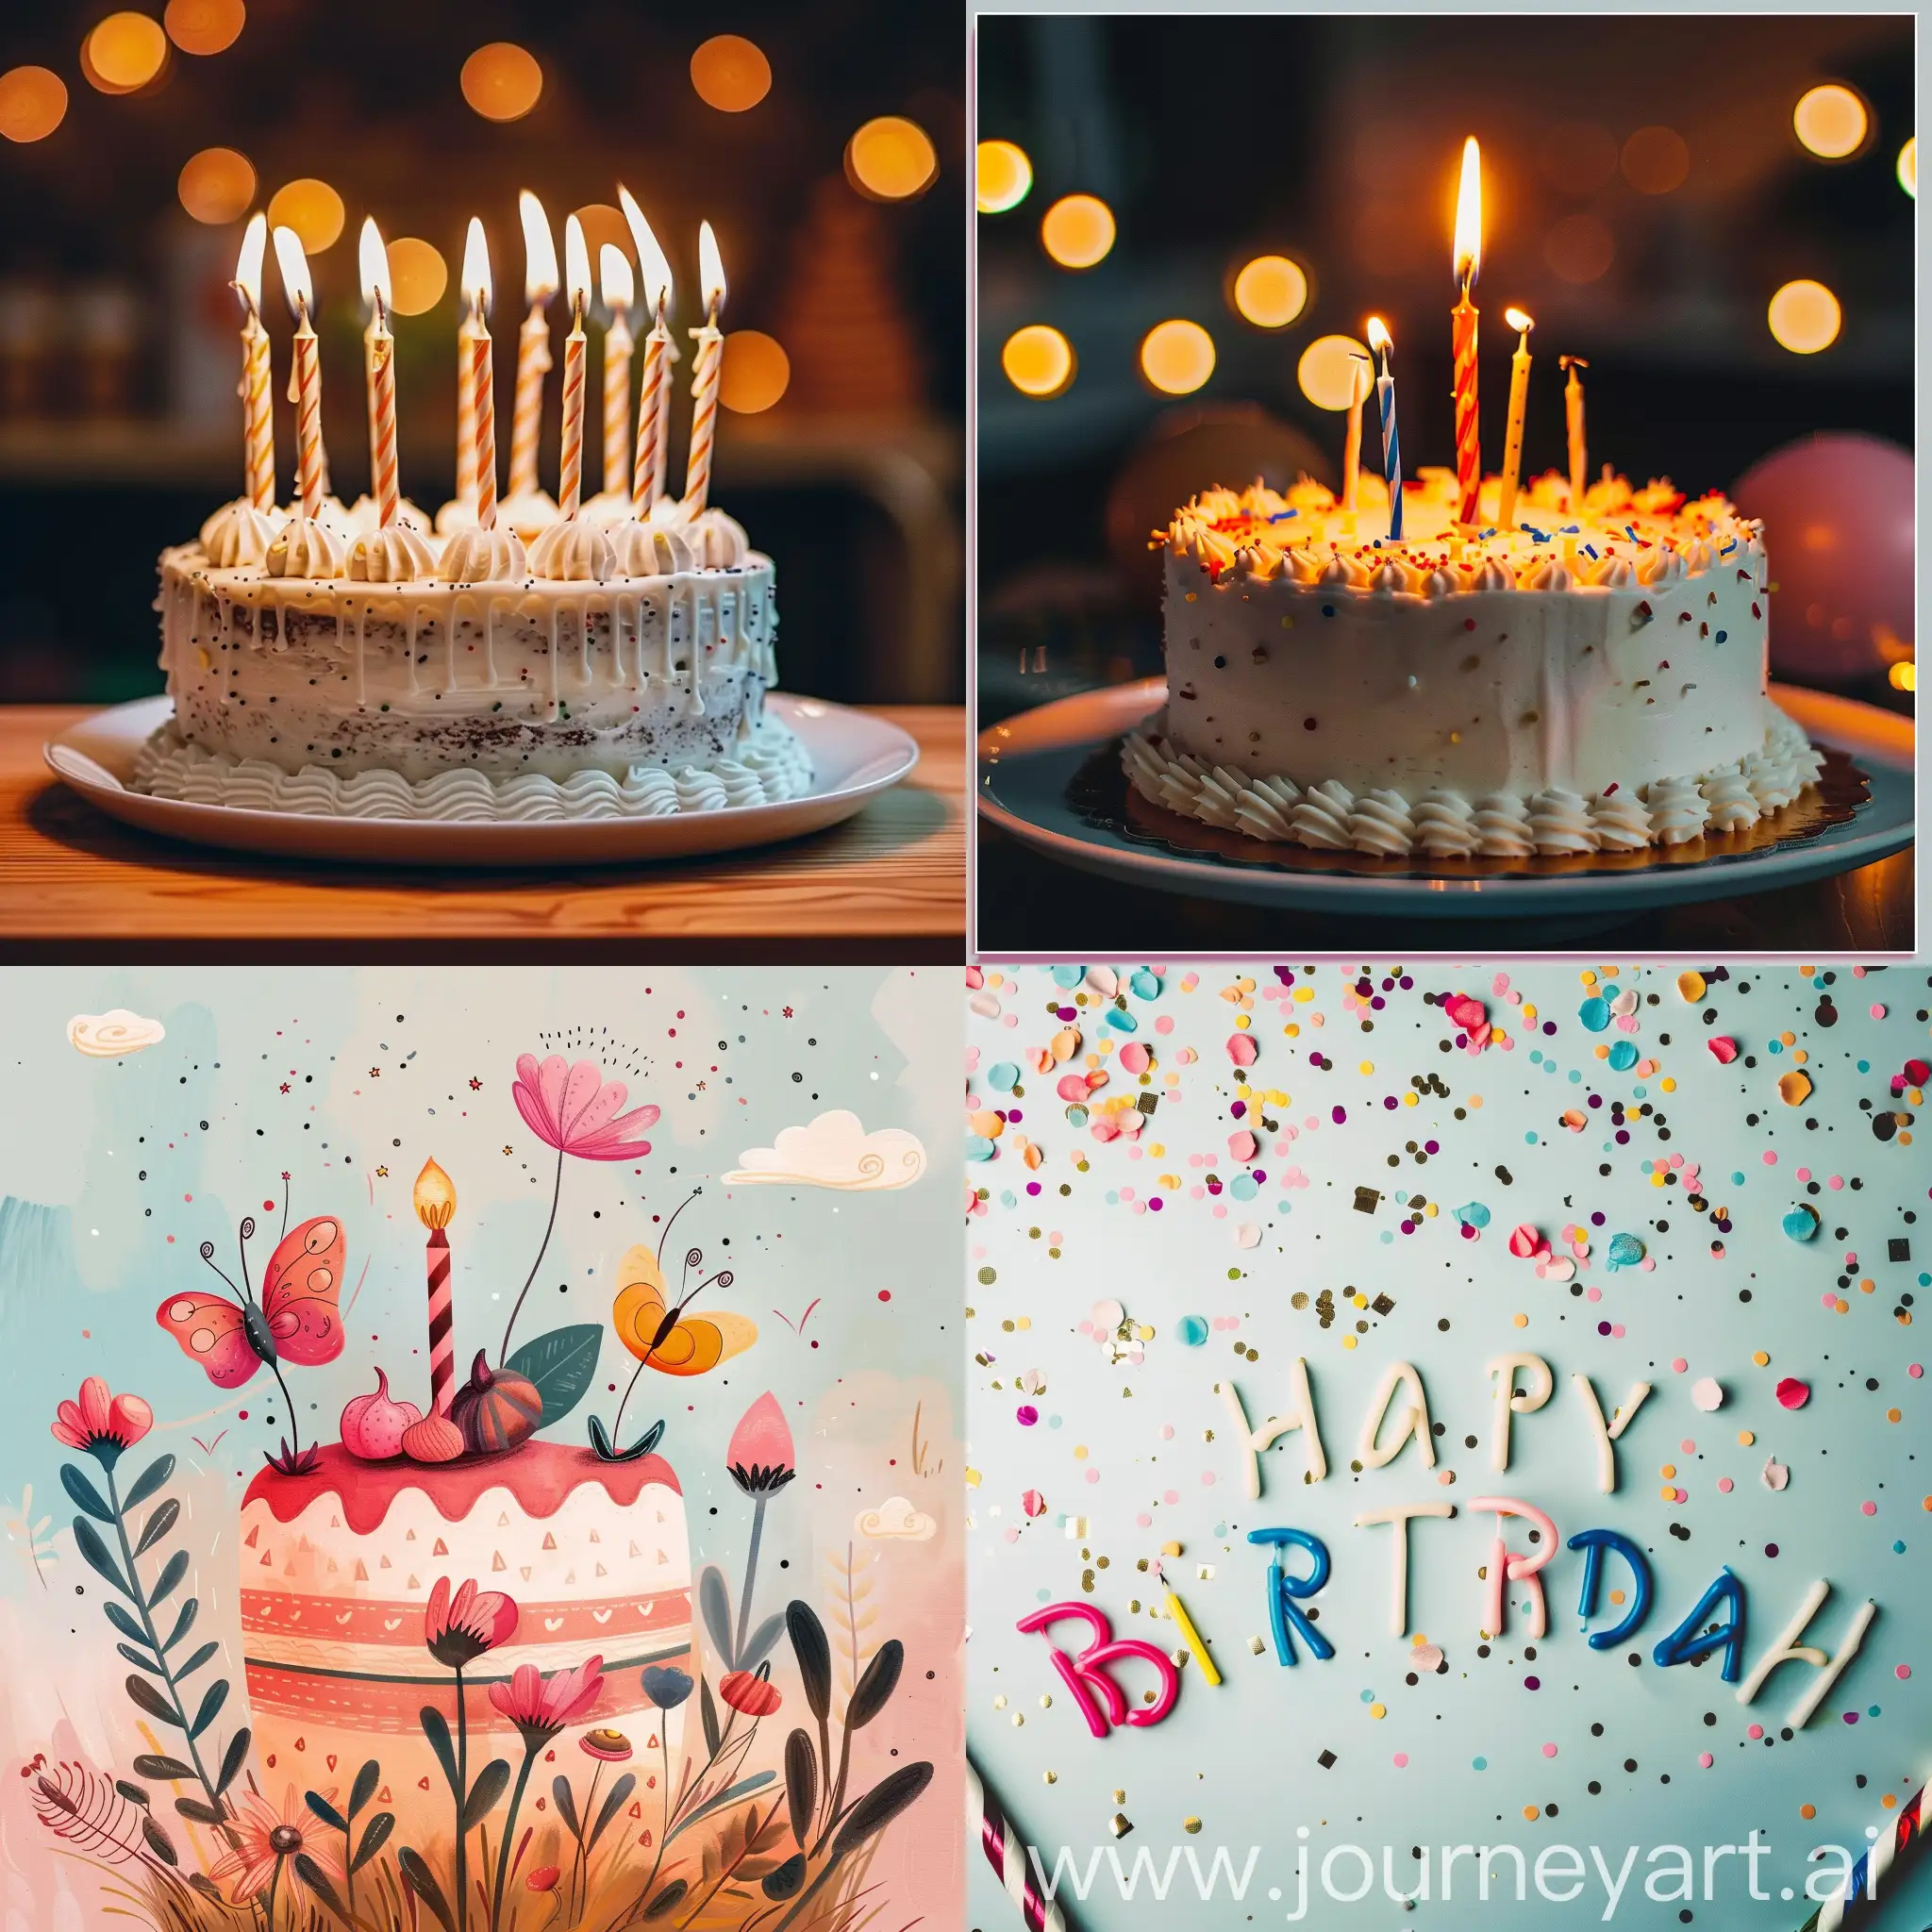 Colorful-Birthday-Celebration-with-Cake-and-Balloons